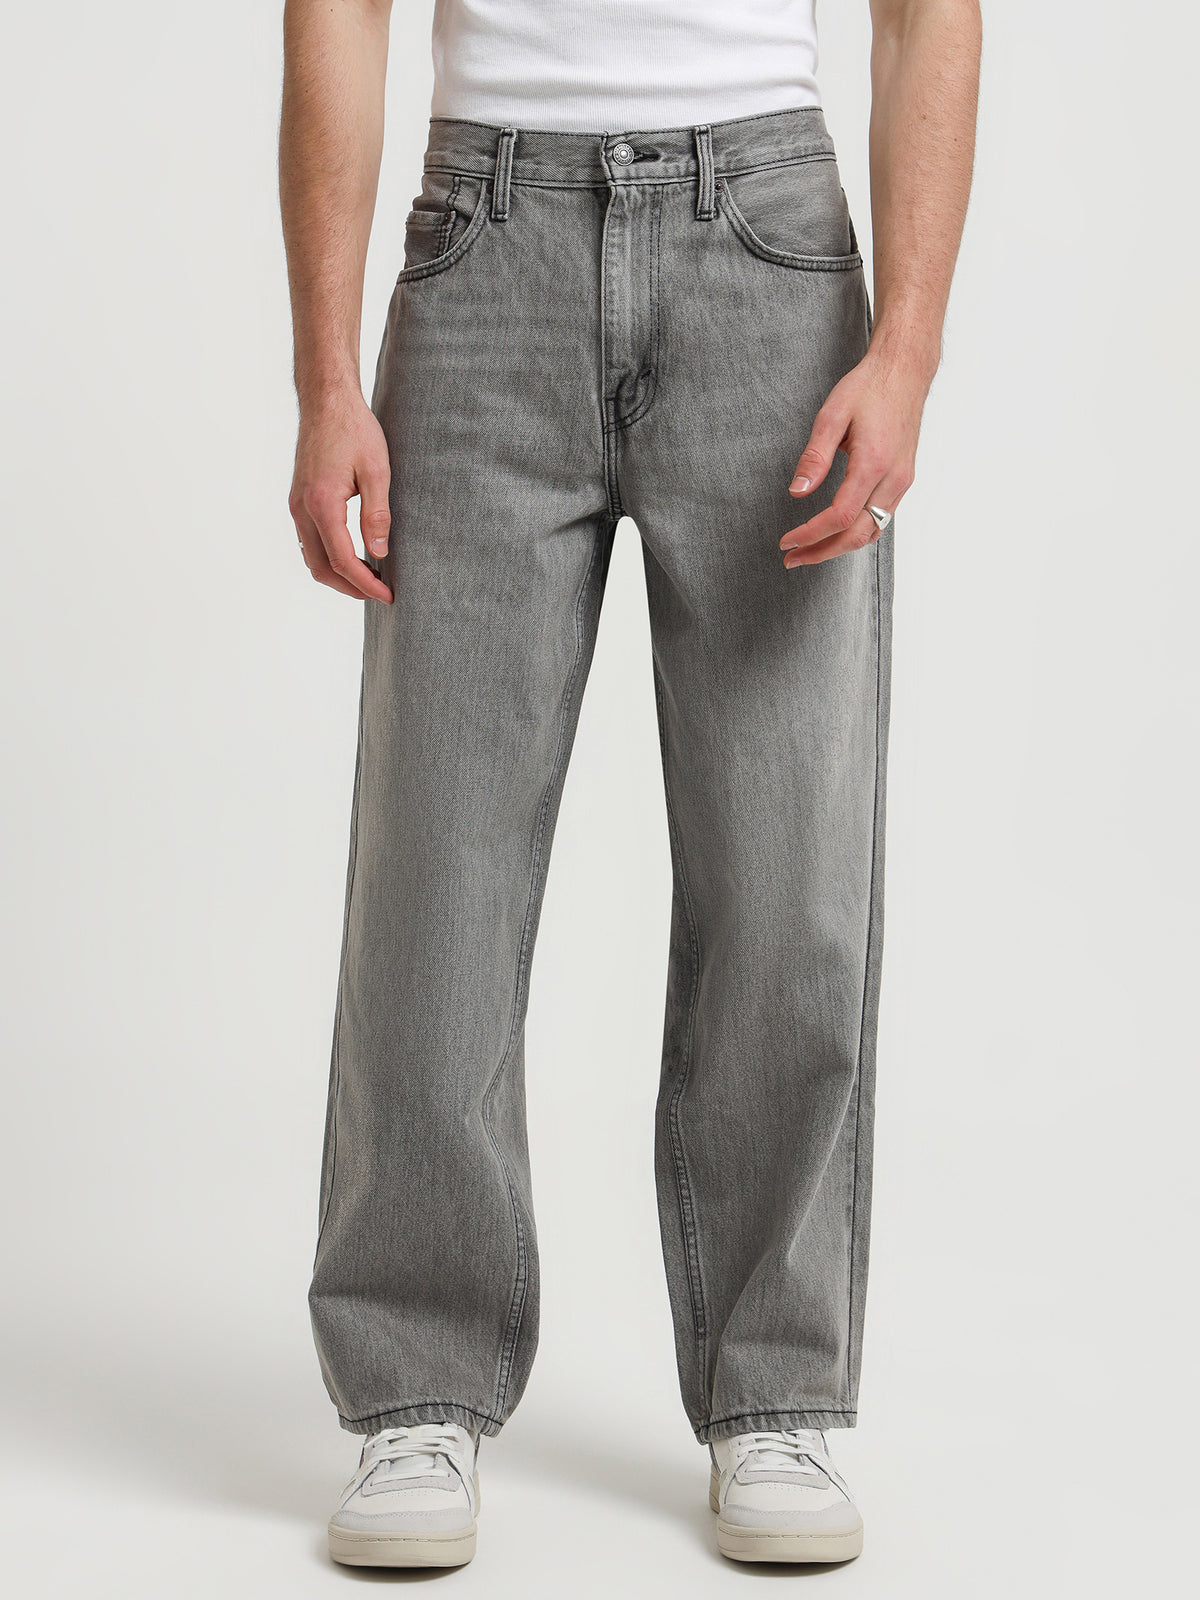 578 Baggy Jeans in Silver Silvertab